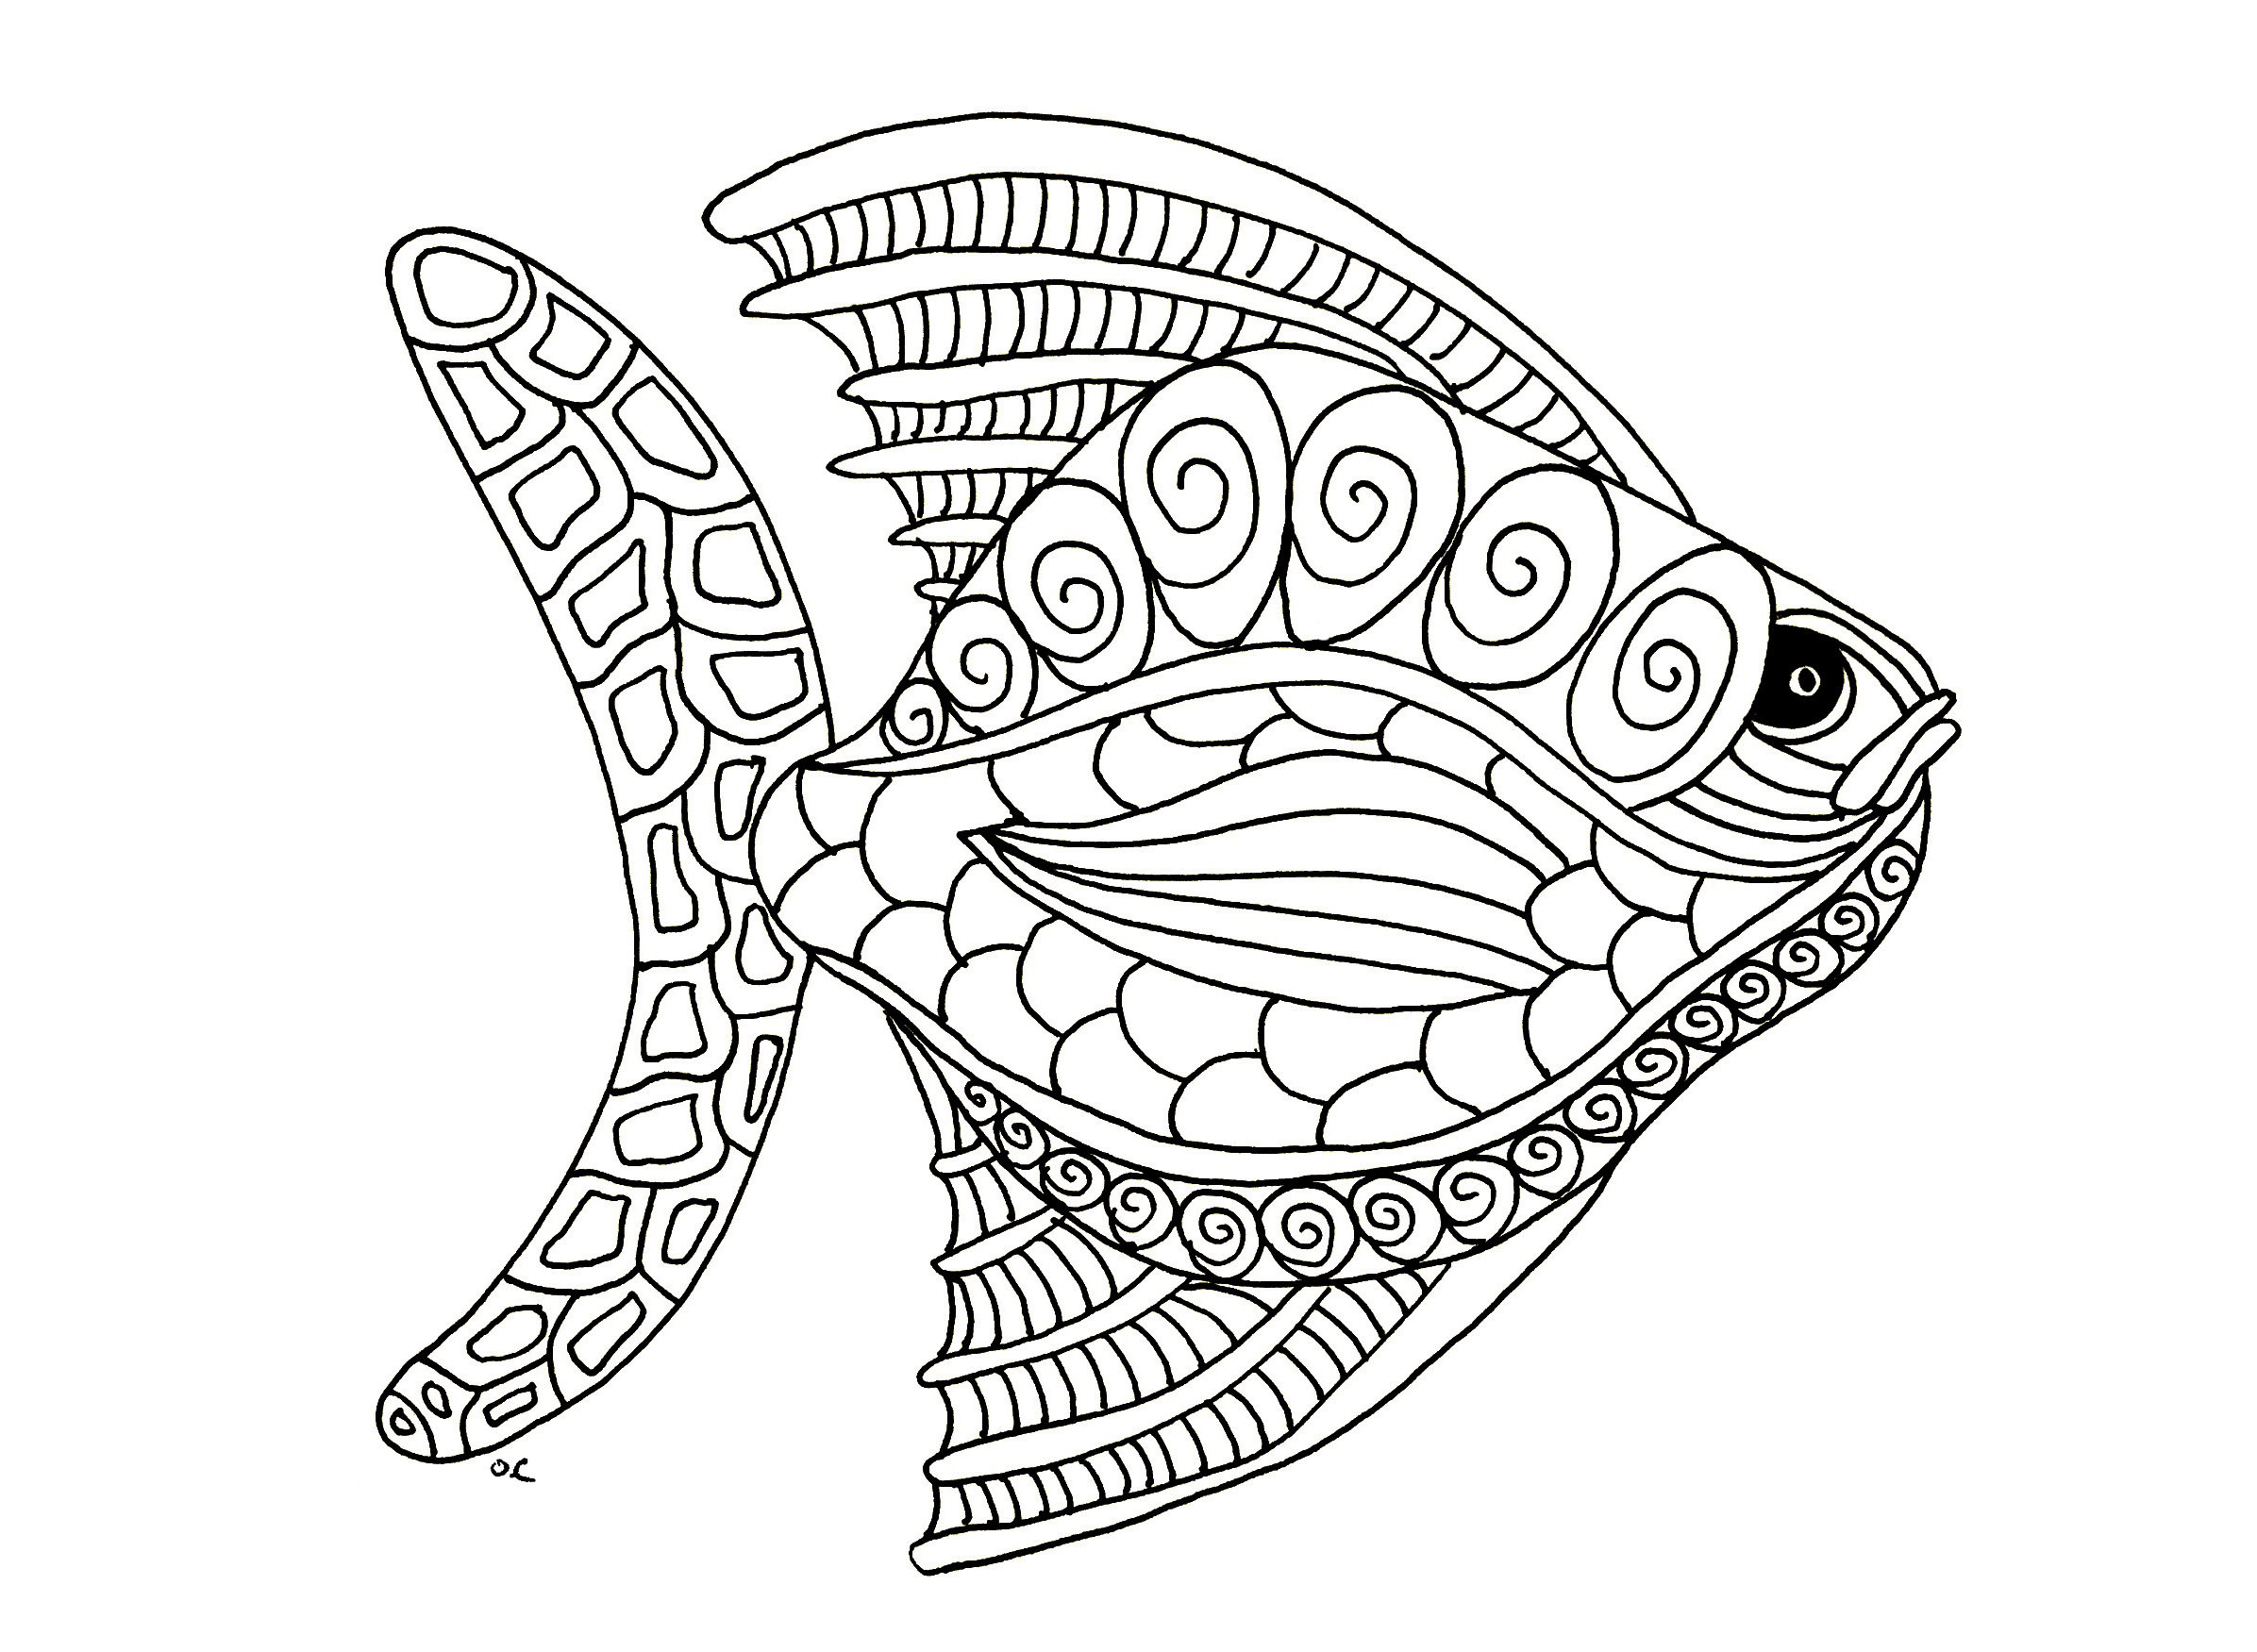 Animal Adult Coloring Pages
 Animal Coloring Pages for Adults Best Coloring Pages For